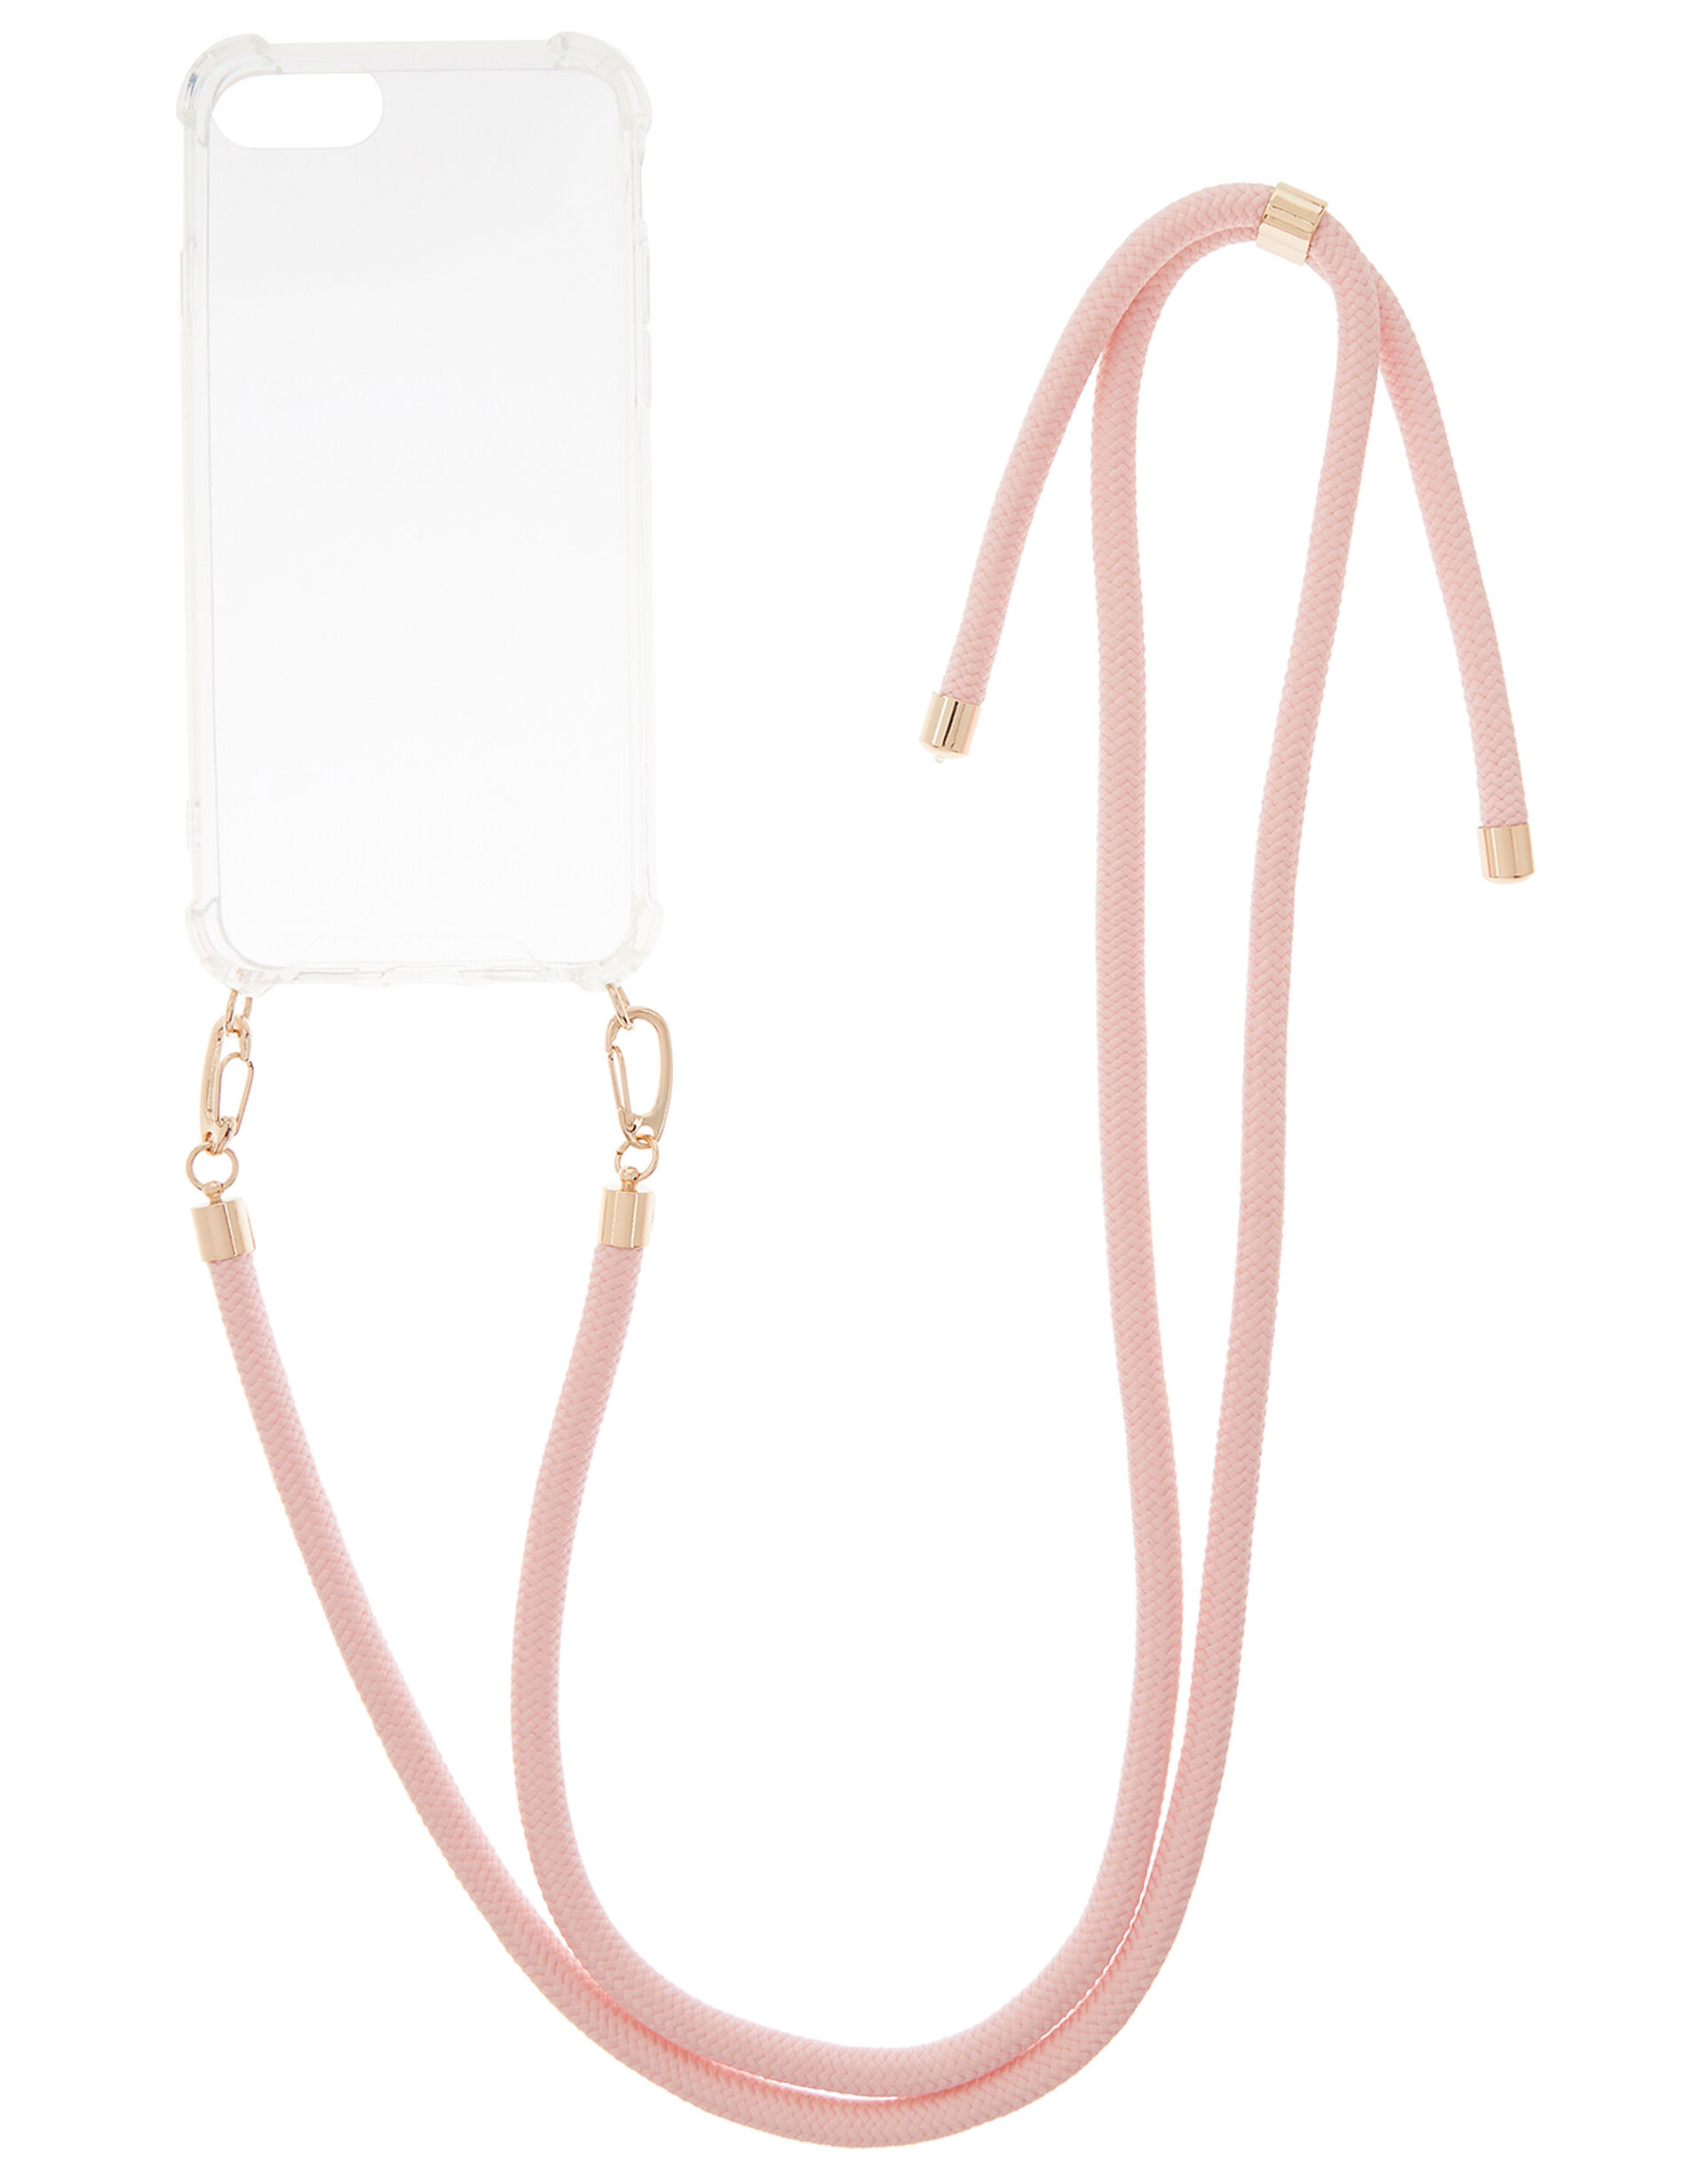 Cord iPhone Necklace, Nude (NUDE), large